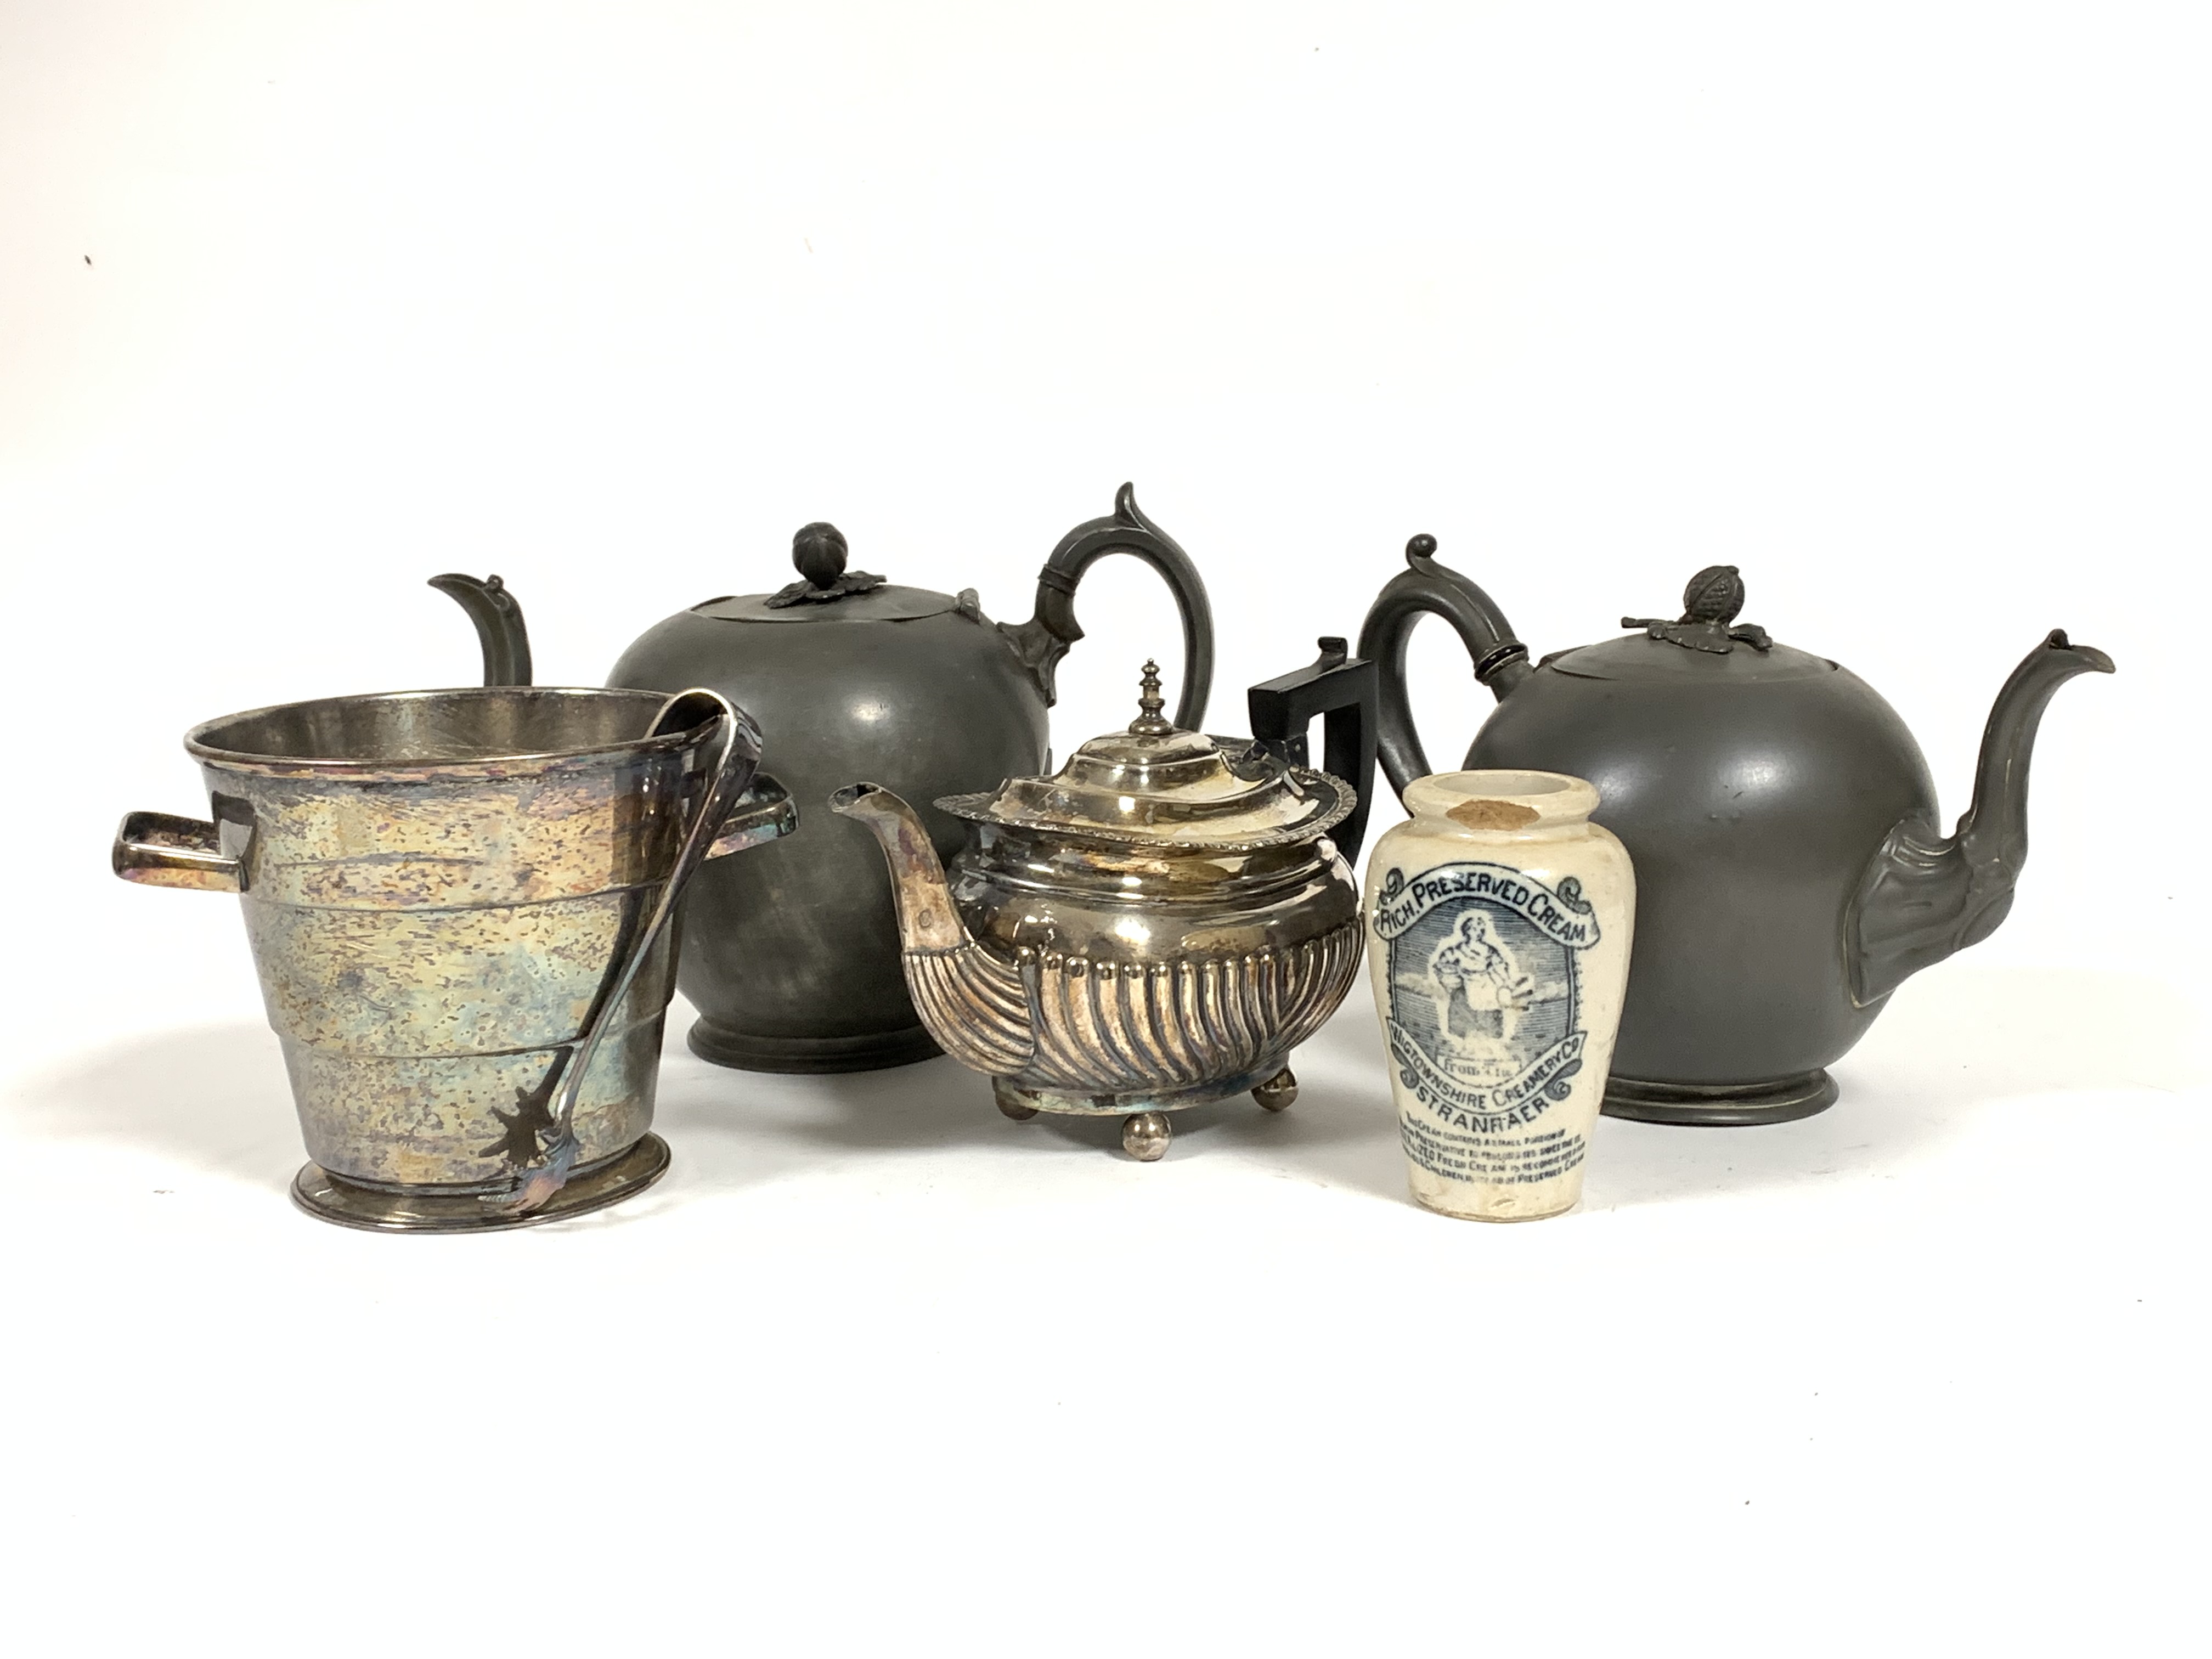 Two Britannia metal 19thc teapots, an Epns gadroon teapot, an Epns ice bucket complete with tongs